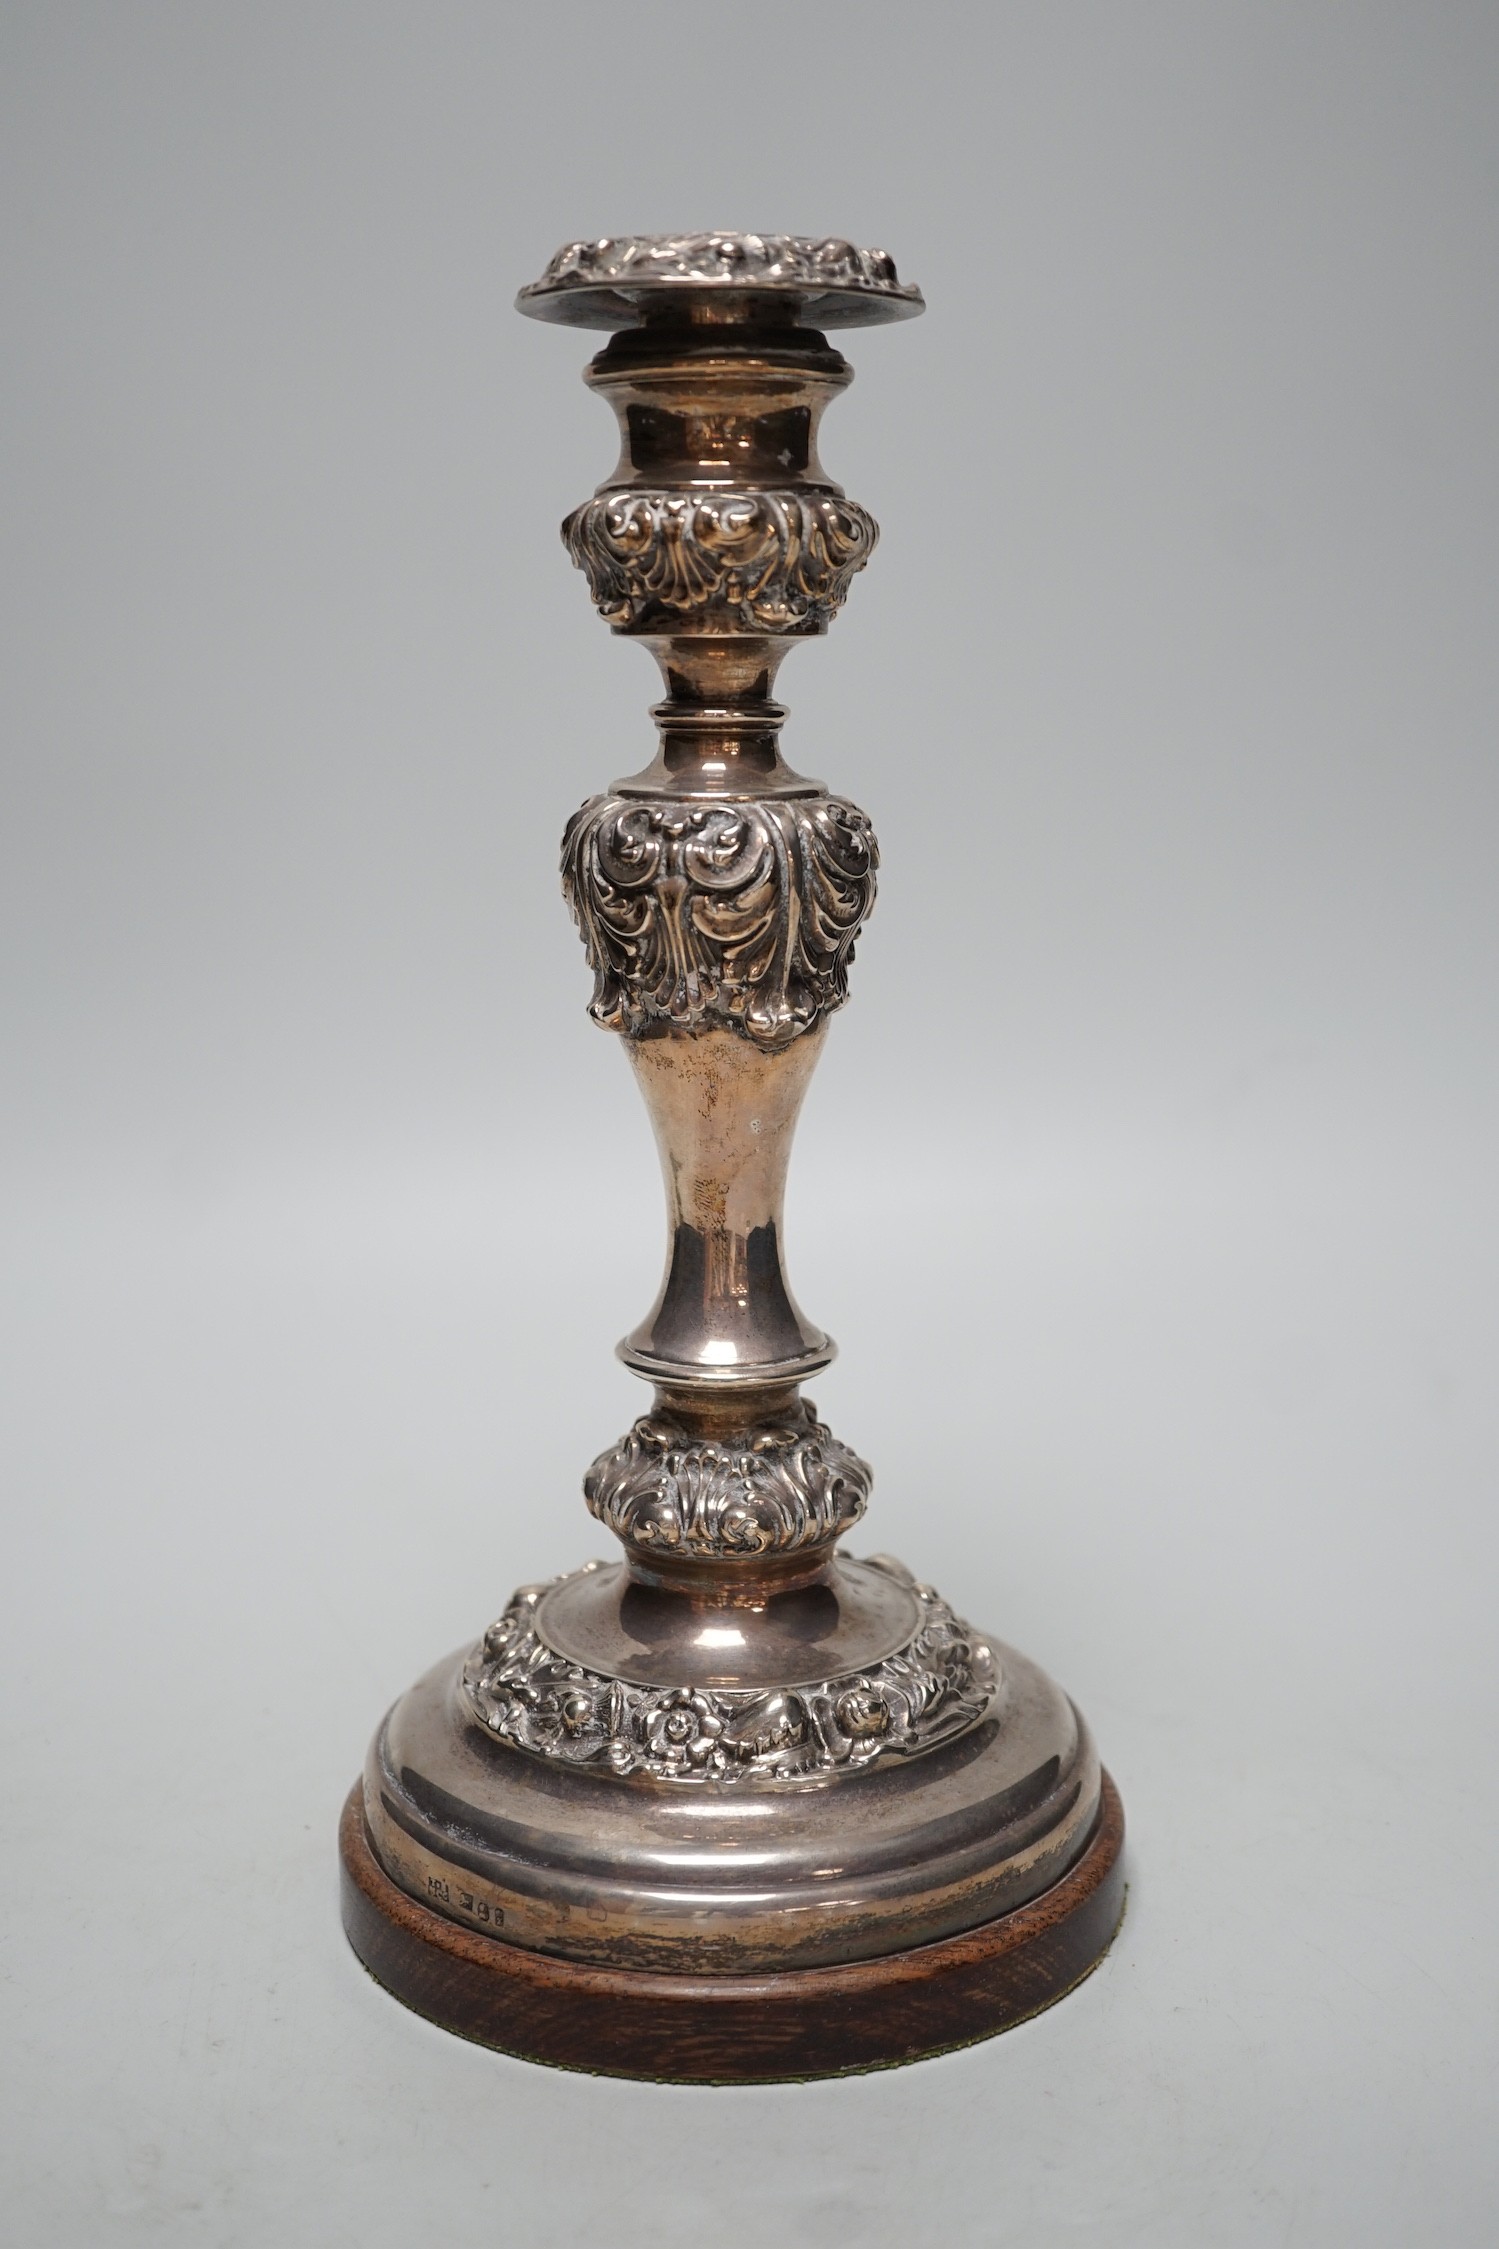 A George IV silver candlestick, Thomas Blagden & Co, Sheffield, 1822, now mounted on a later wooden base, with drill hole for electricity??, overall height 26.9cm.